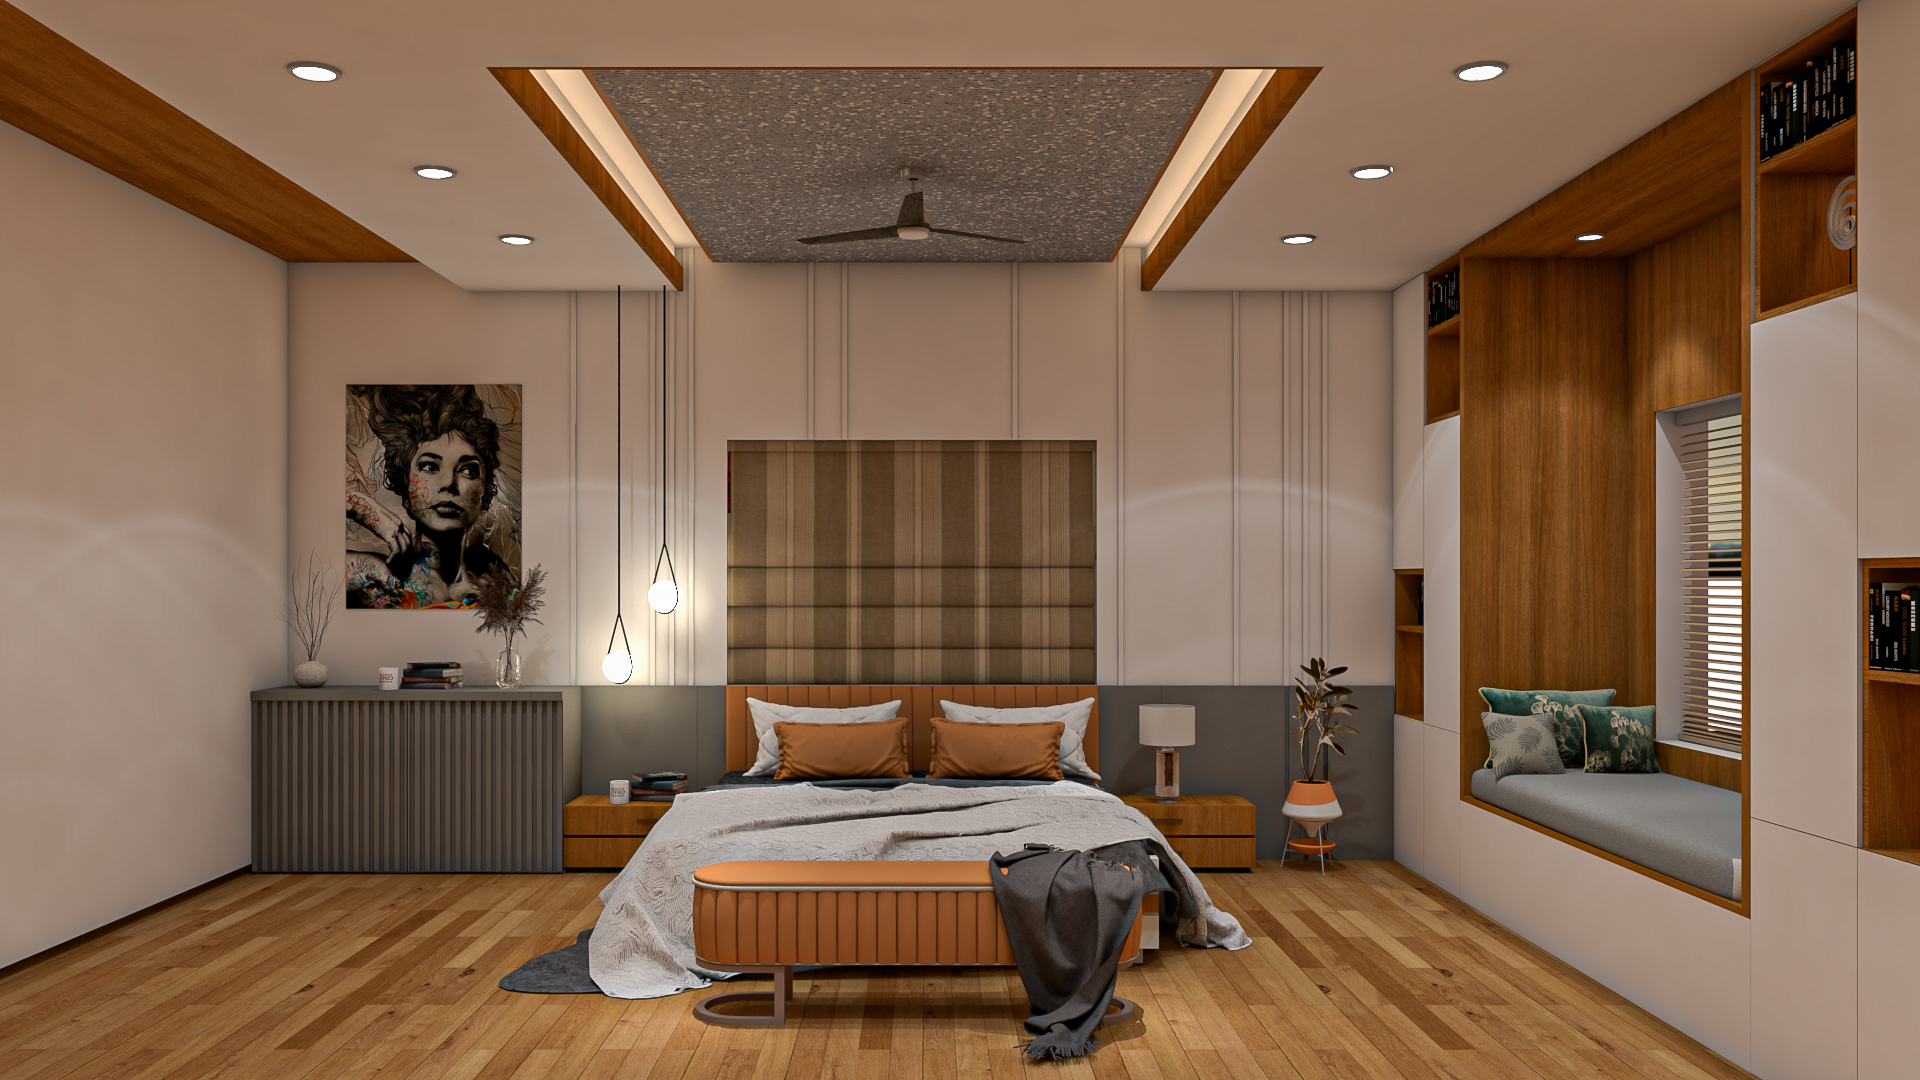 “Elegant Bedroom Ideas Luxurious Retreats for Relaxation”